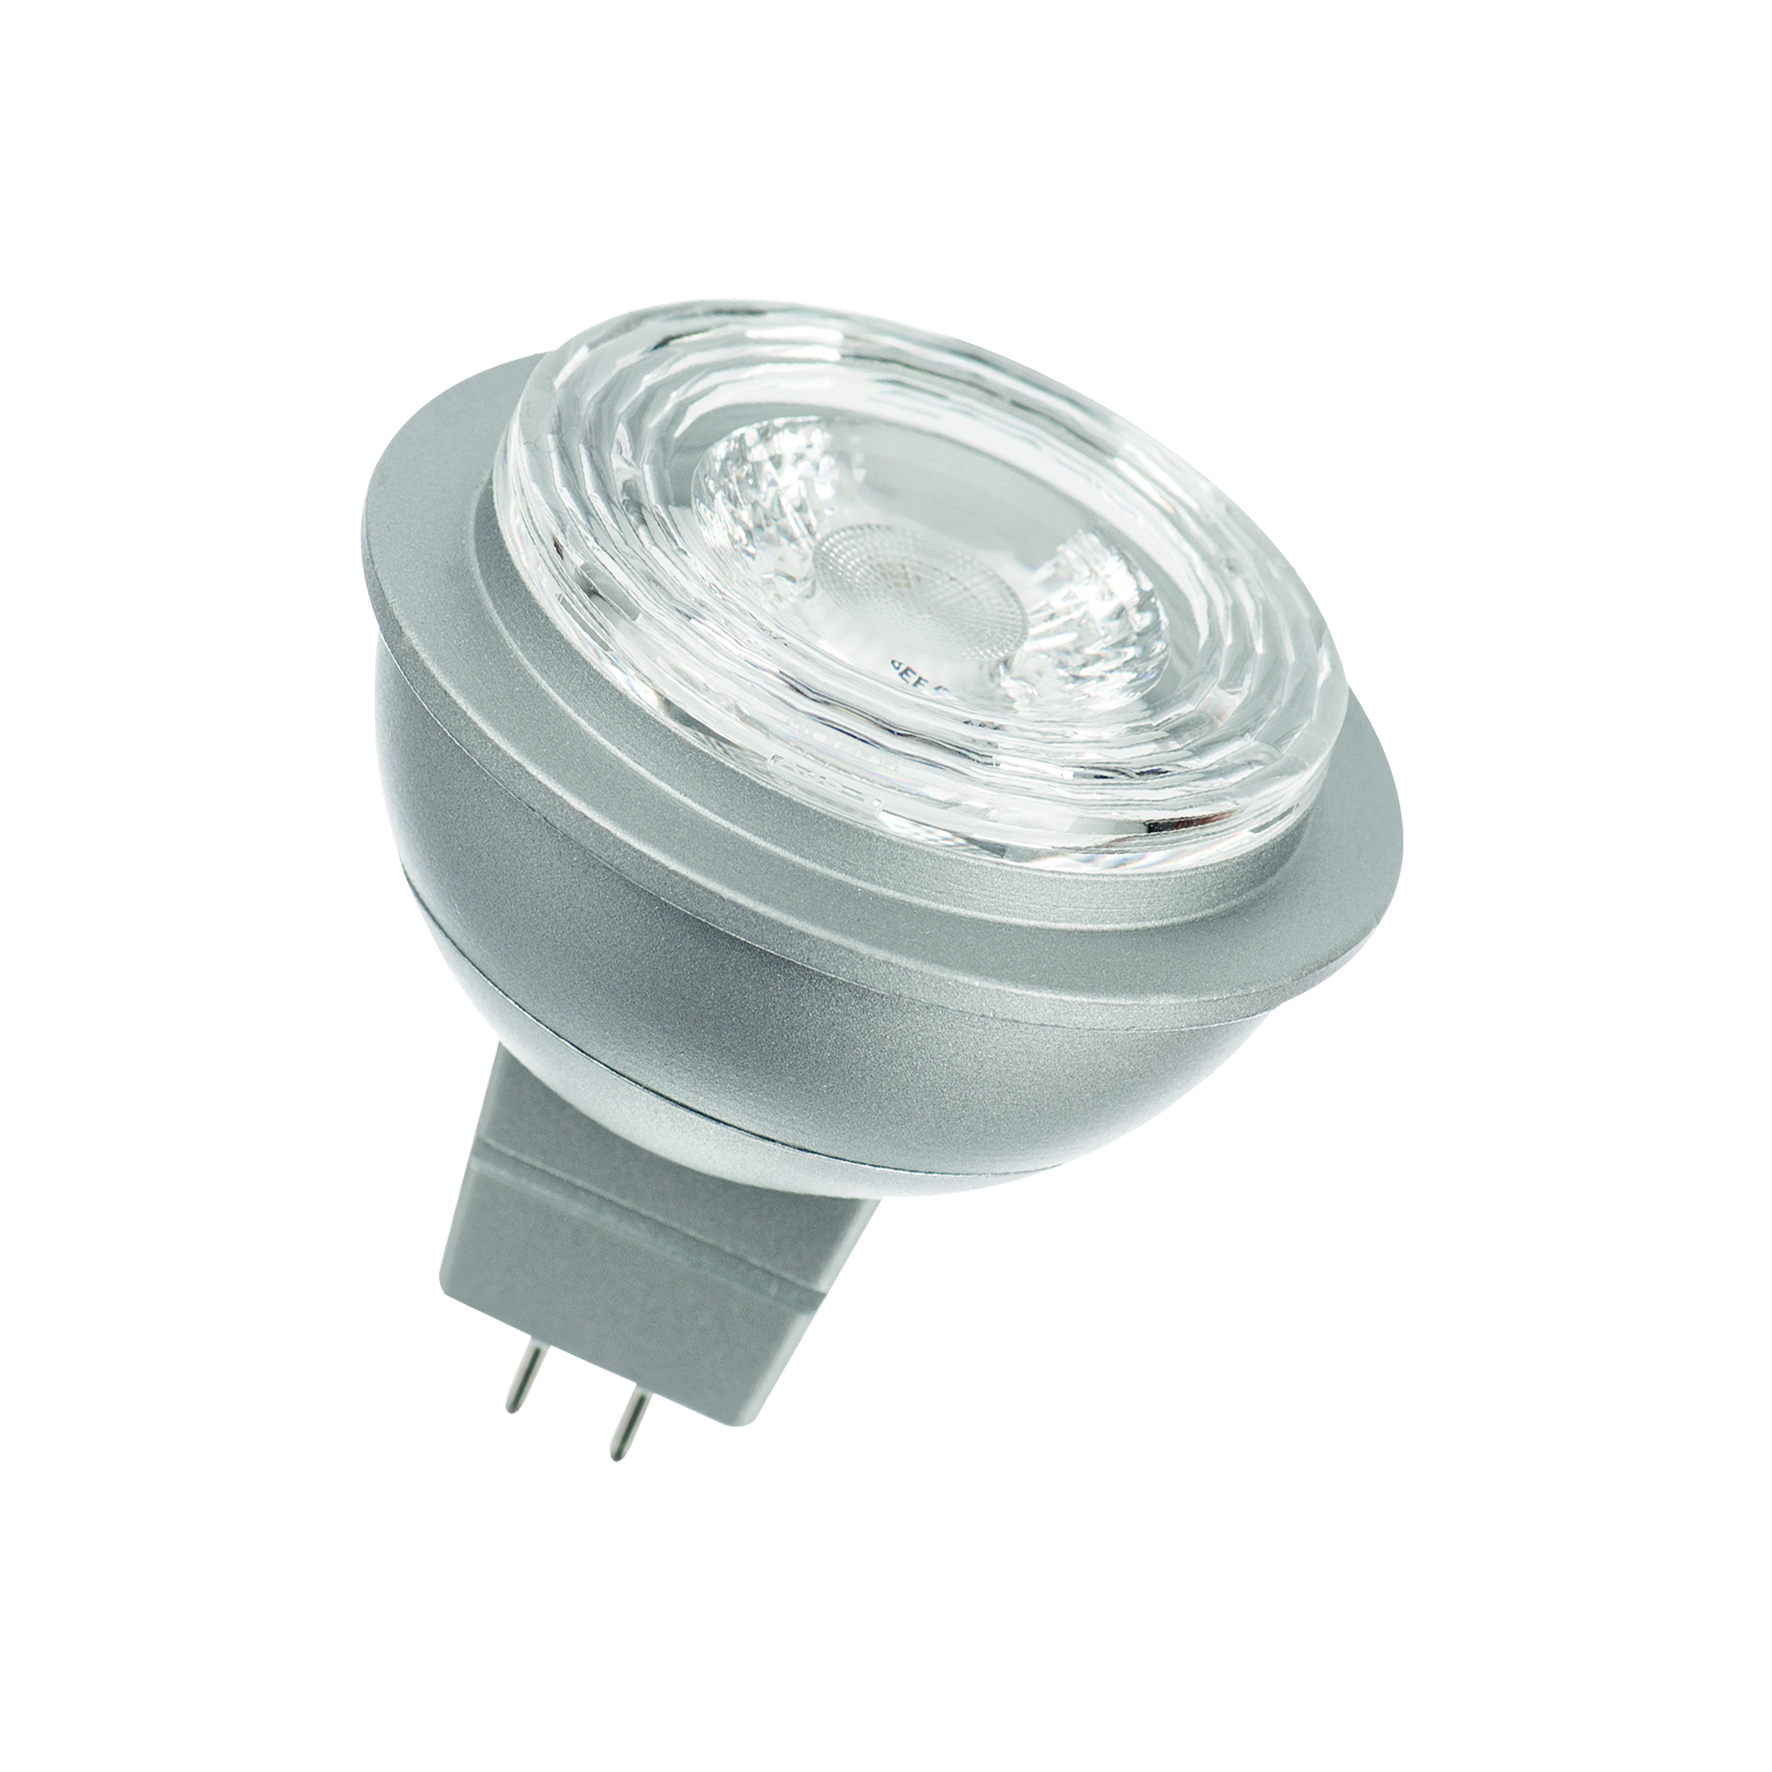 LED7XD MR16 GU5.3 7W/827 25D Dimmable